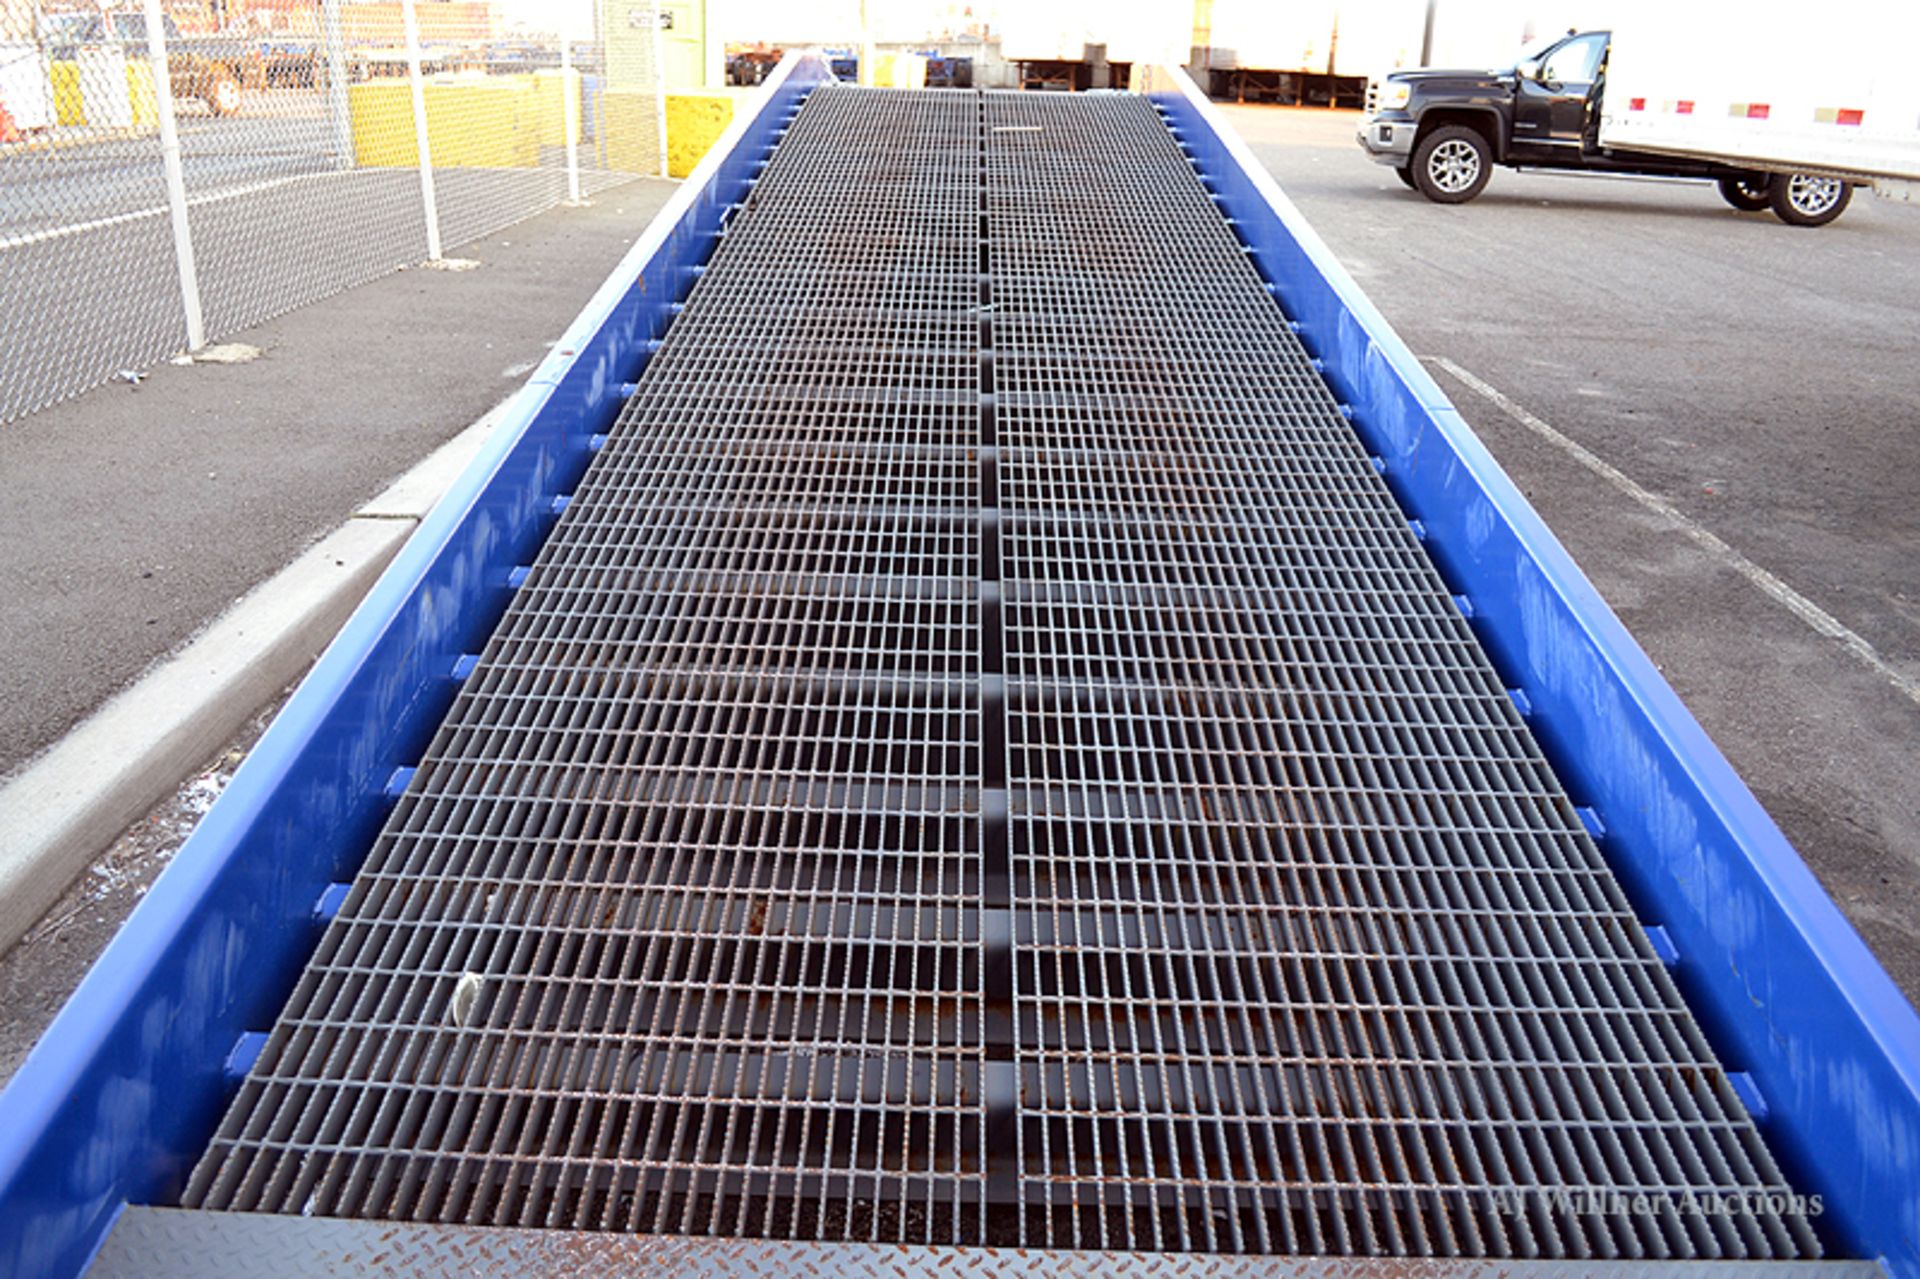 Bluff Manufacturing model 20SYS8436L yard ramp, 84"x36', 20,000 lbs. Capacity - Image 5 of 6